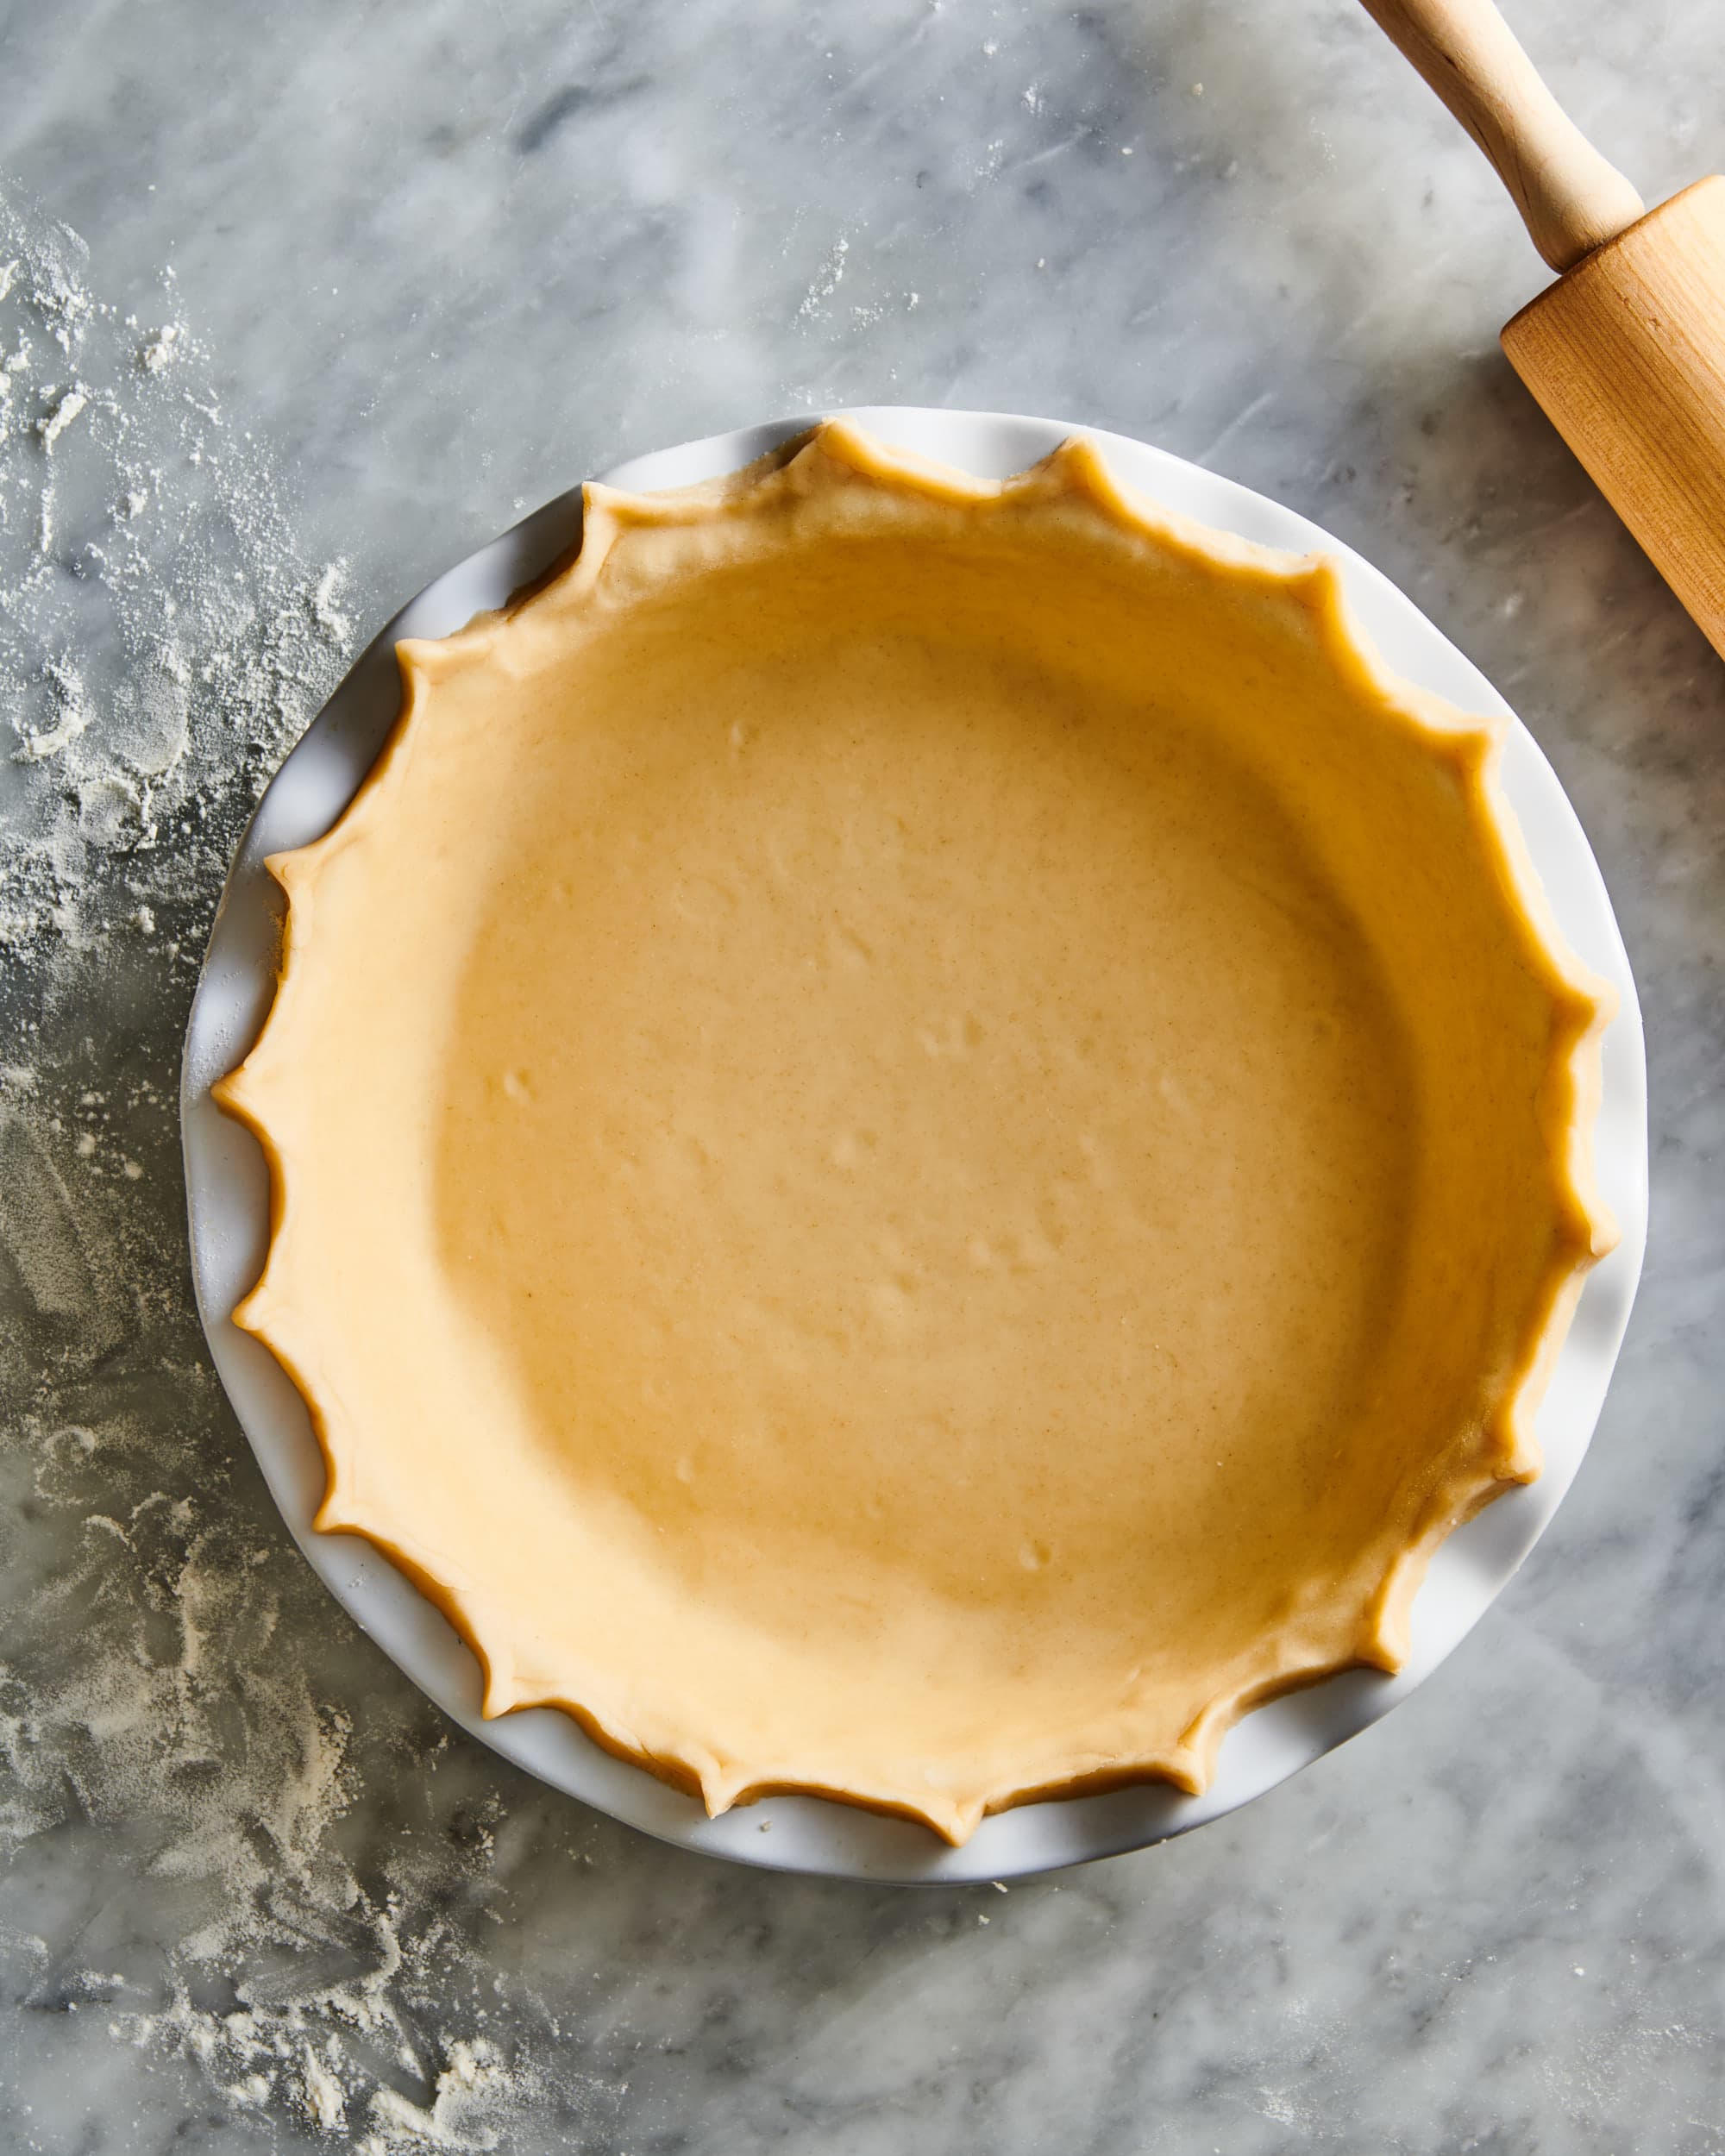 How to fix a cracked pie crust -- before & after baking